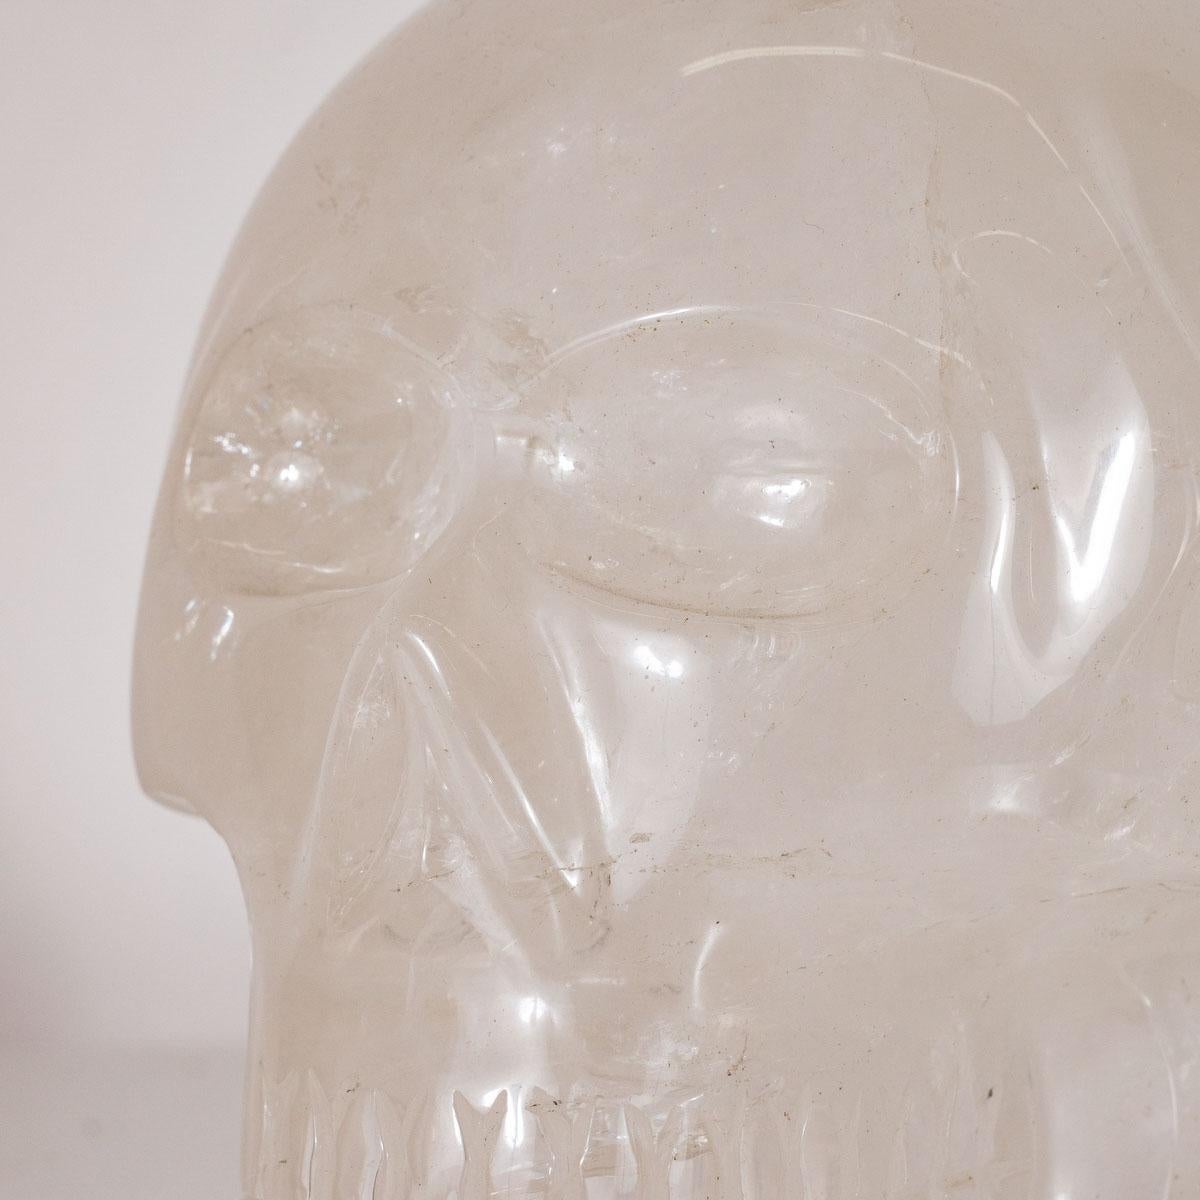 Late 20th Century Rock Crystal Skull Sculpture For Sale